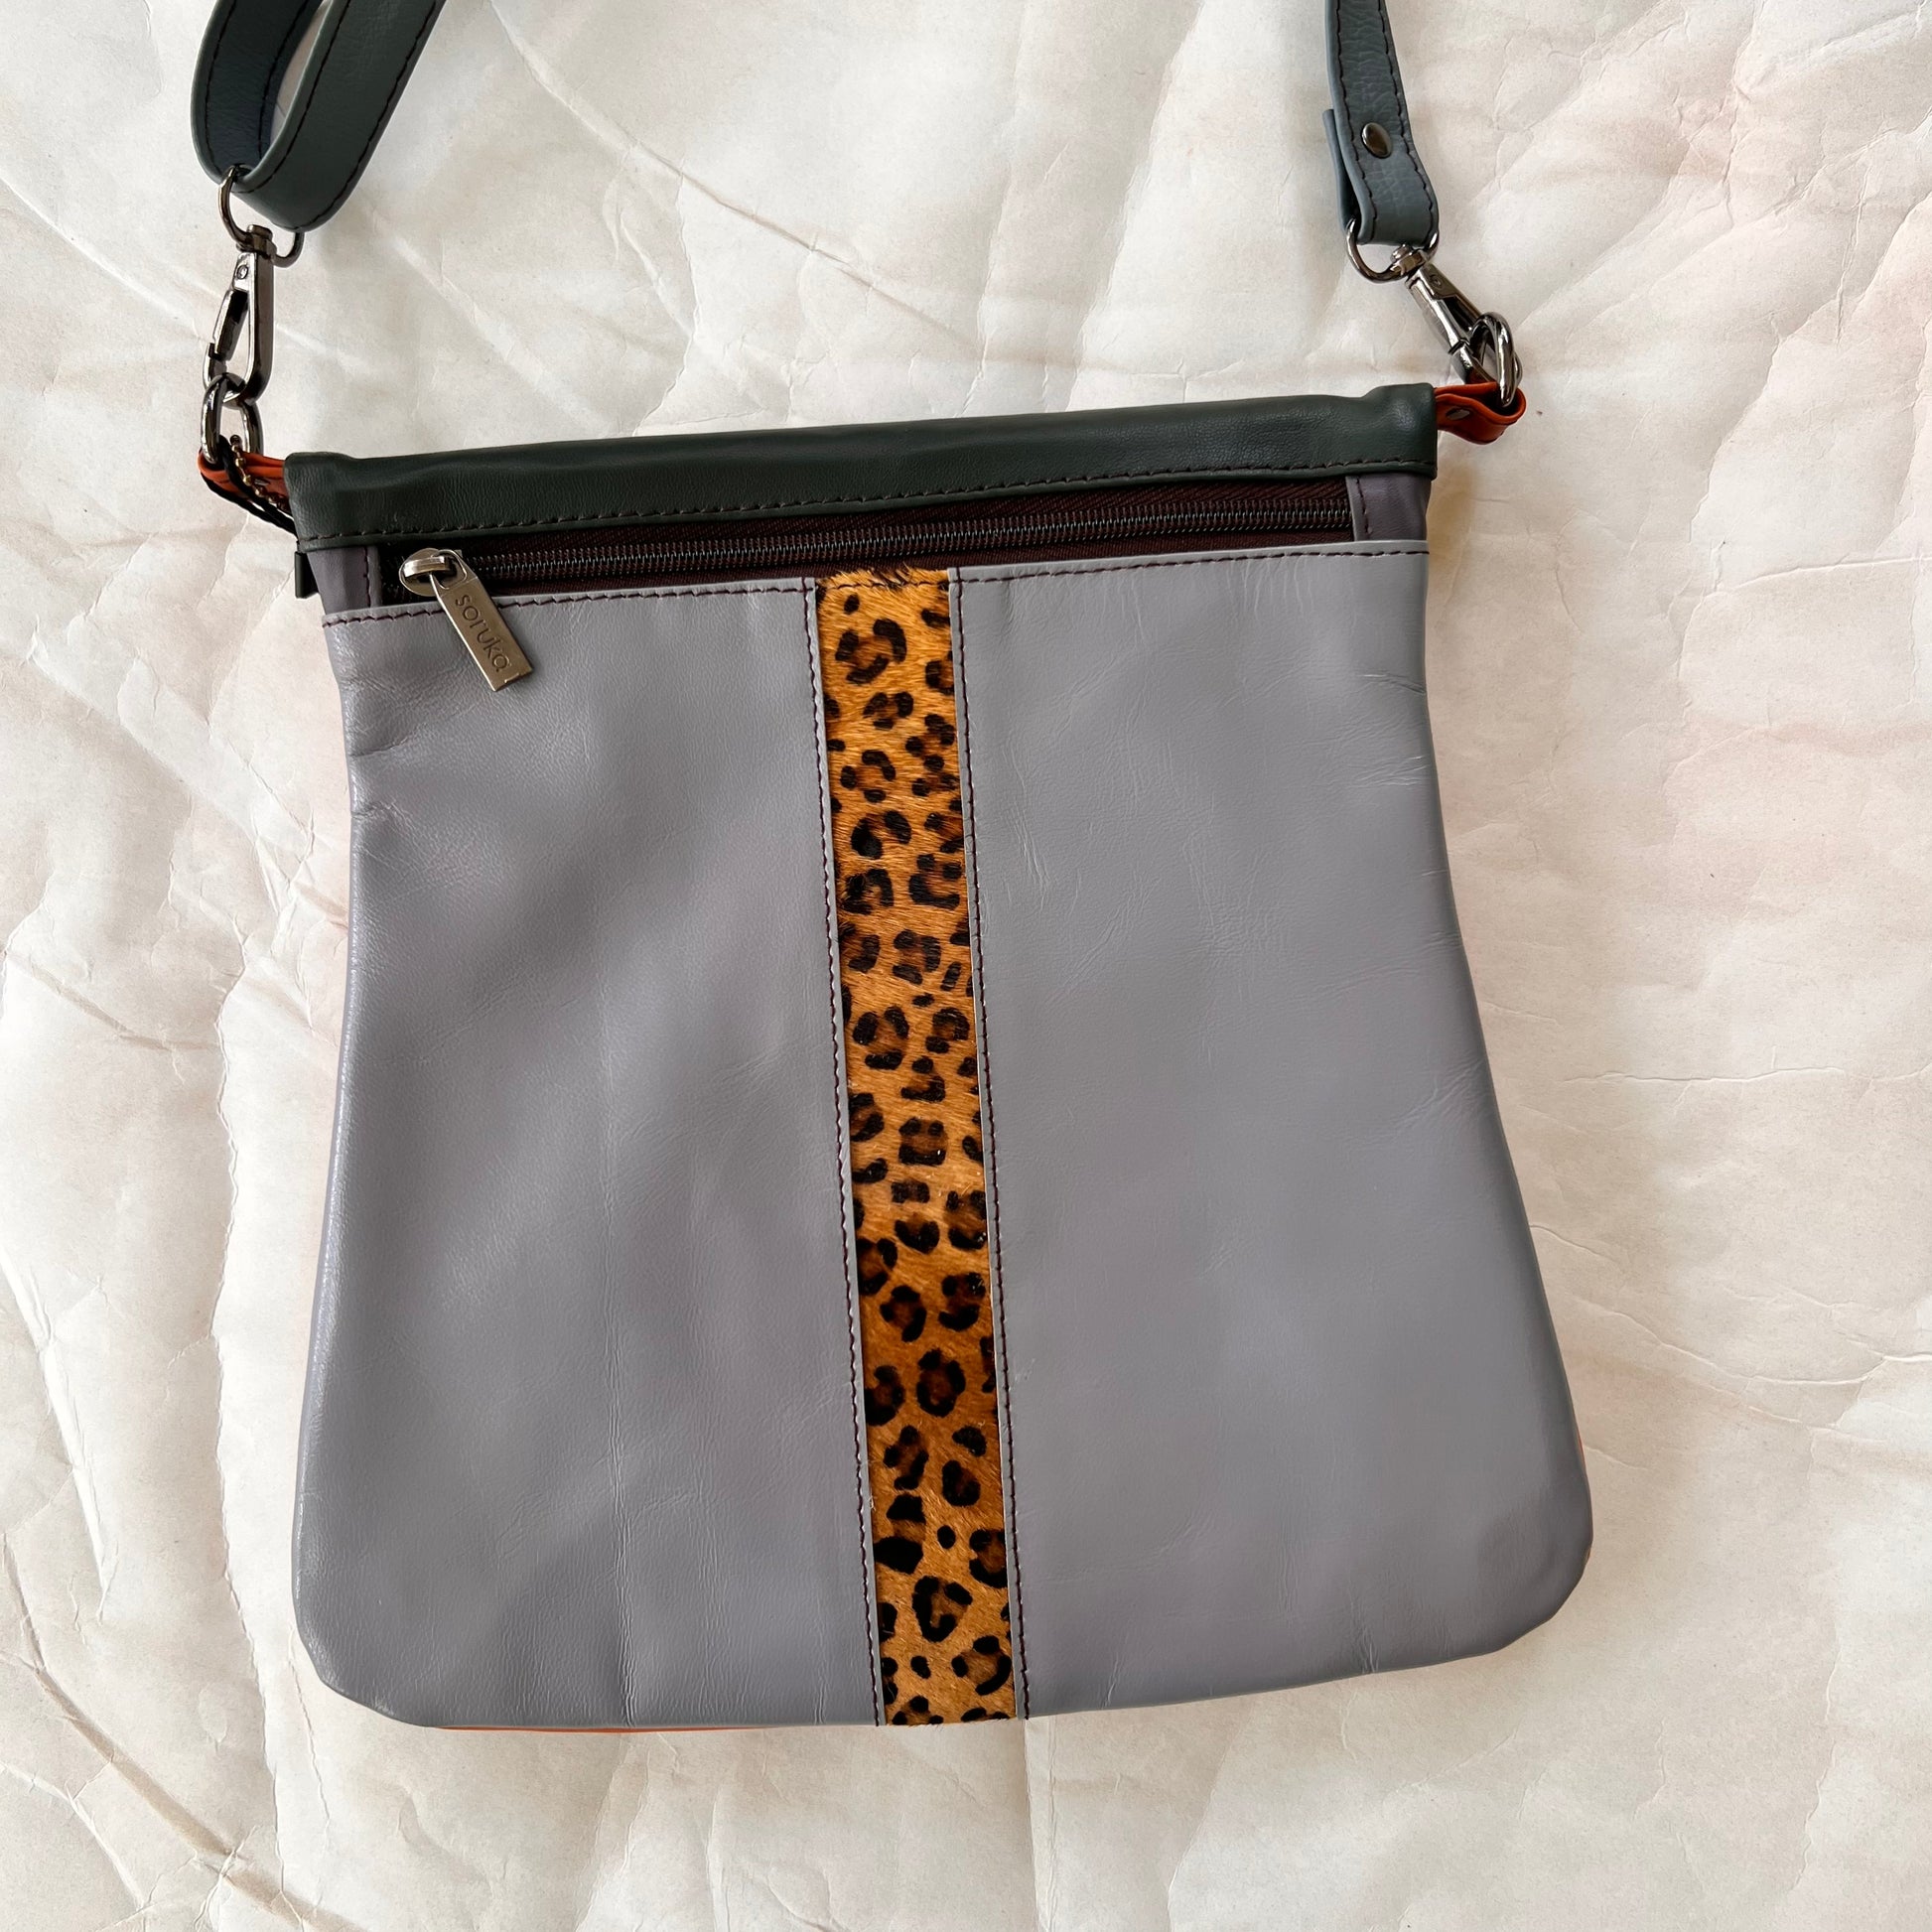 grey greta bag with animal print stripe down the center and zipper at the top.